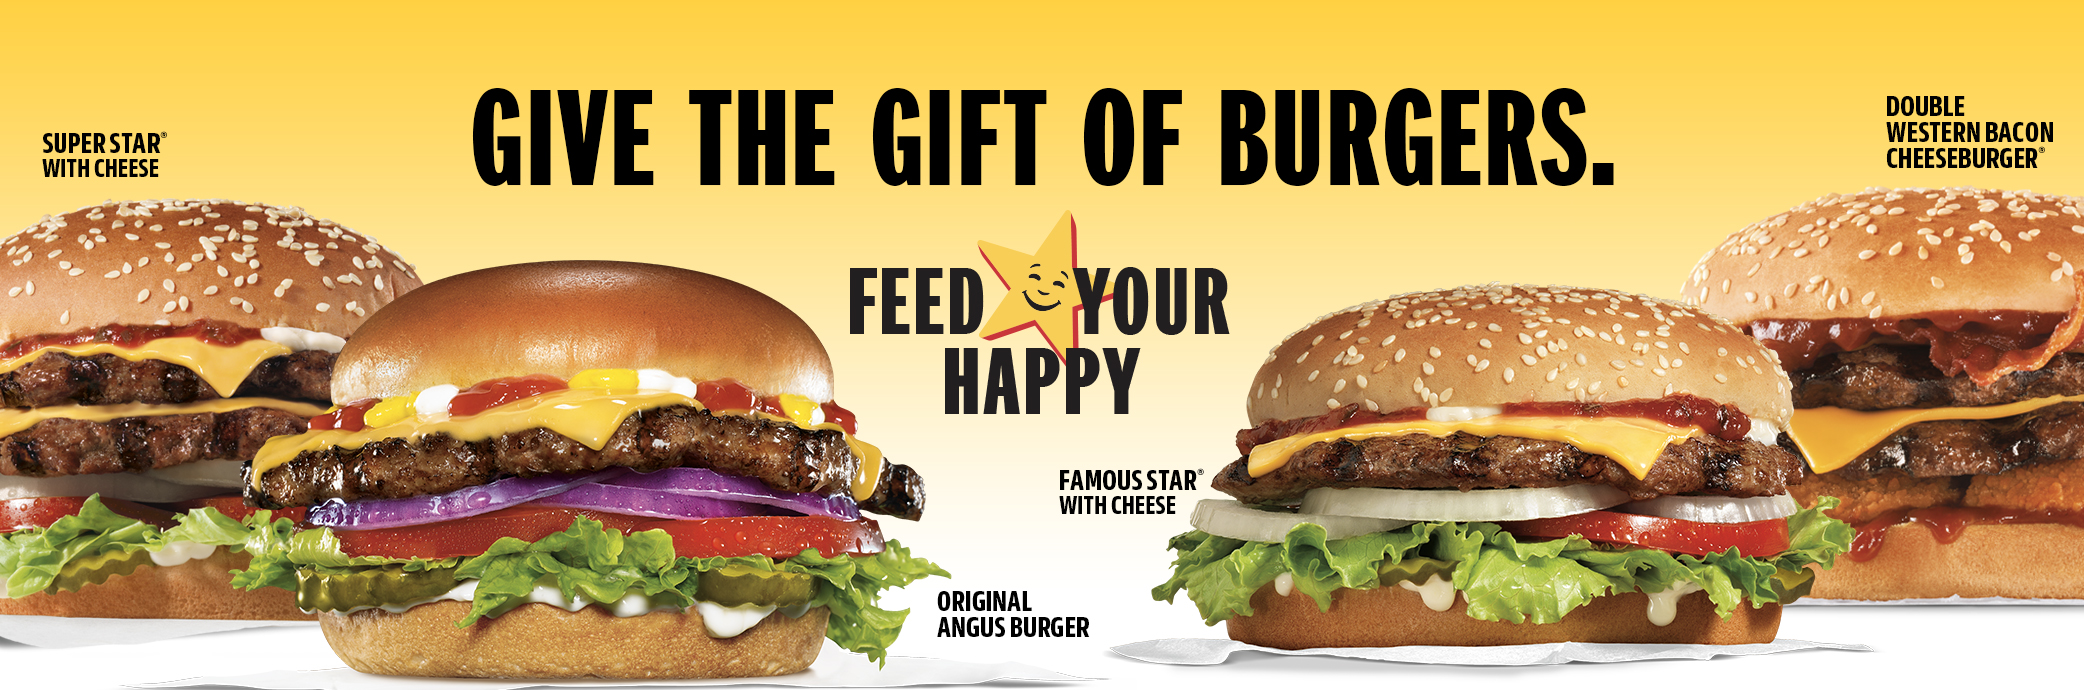 Carl's Jr. Gift Cards | Buy a Gift Card for Carl's Jr